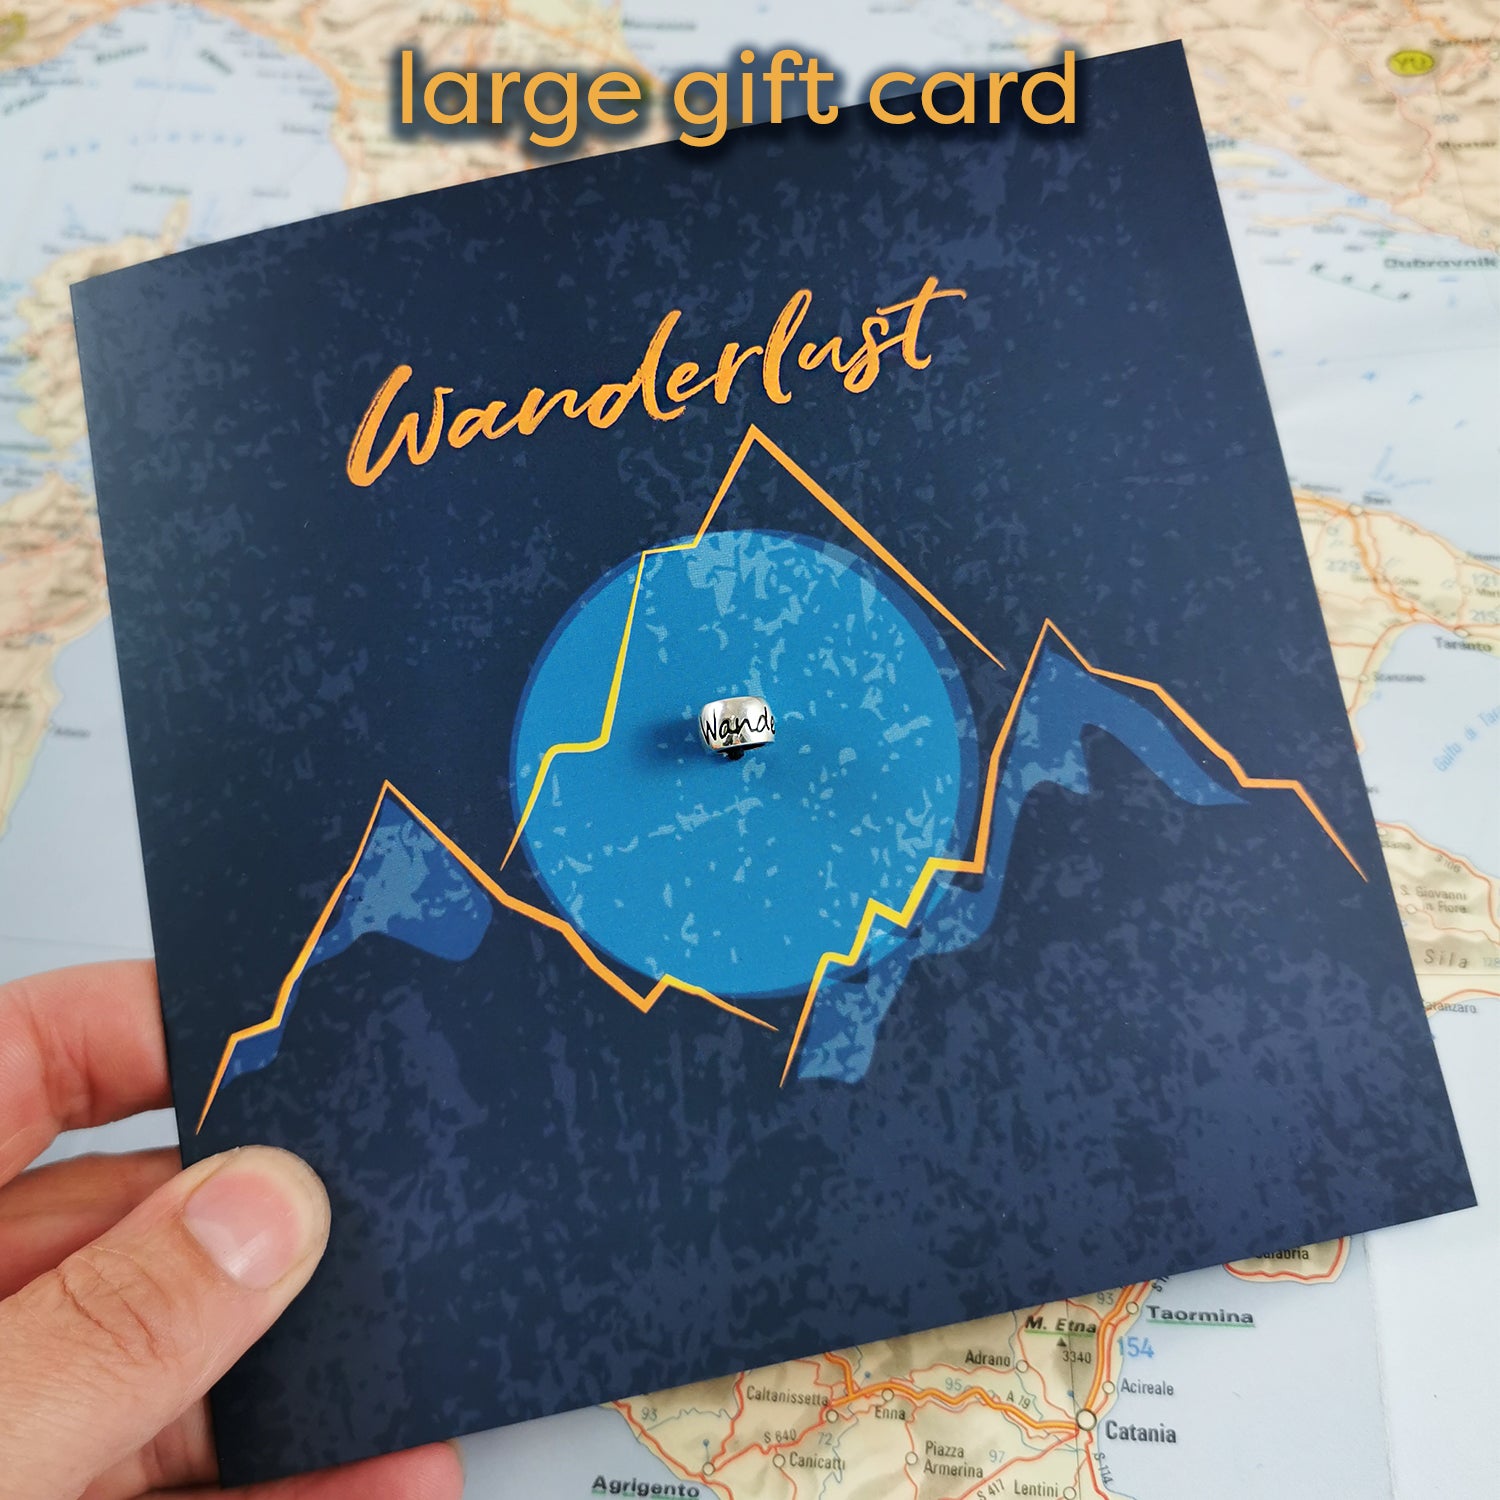 Wanderlust gift card with silver charm going away travelling gift